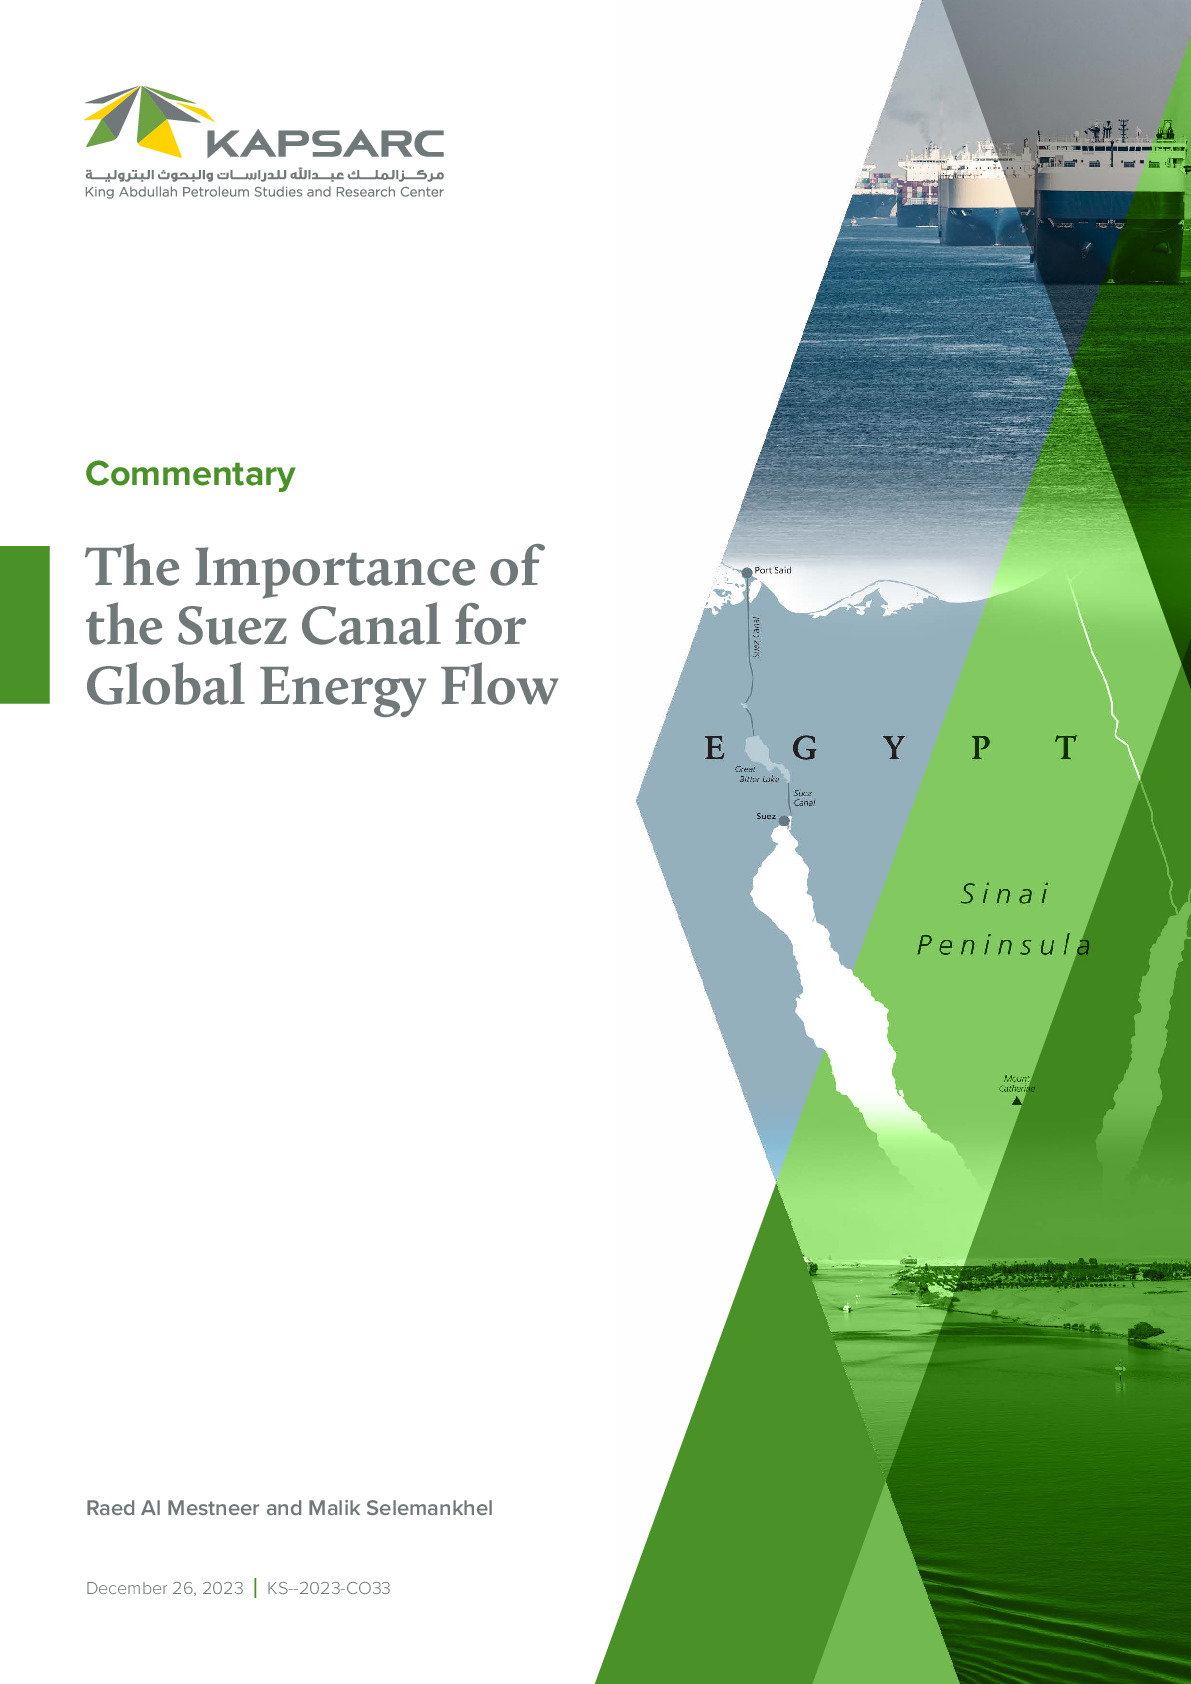 The Importance of the Suez Canal for Global Energy Flow